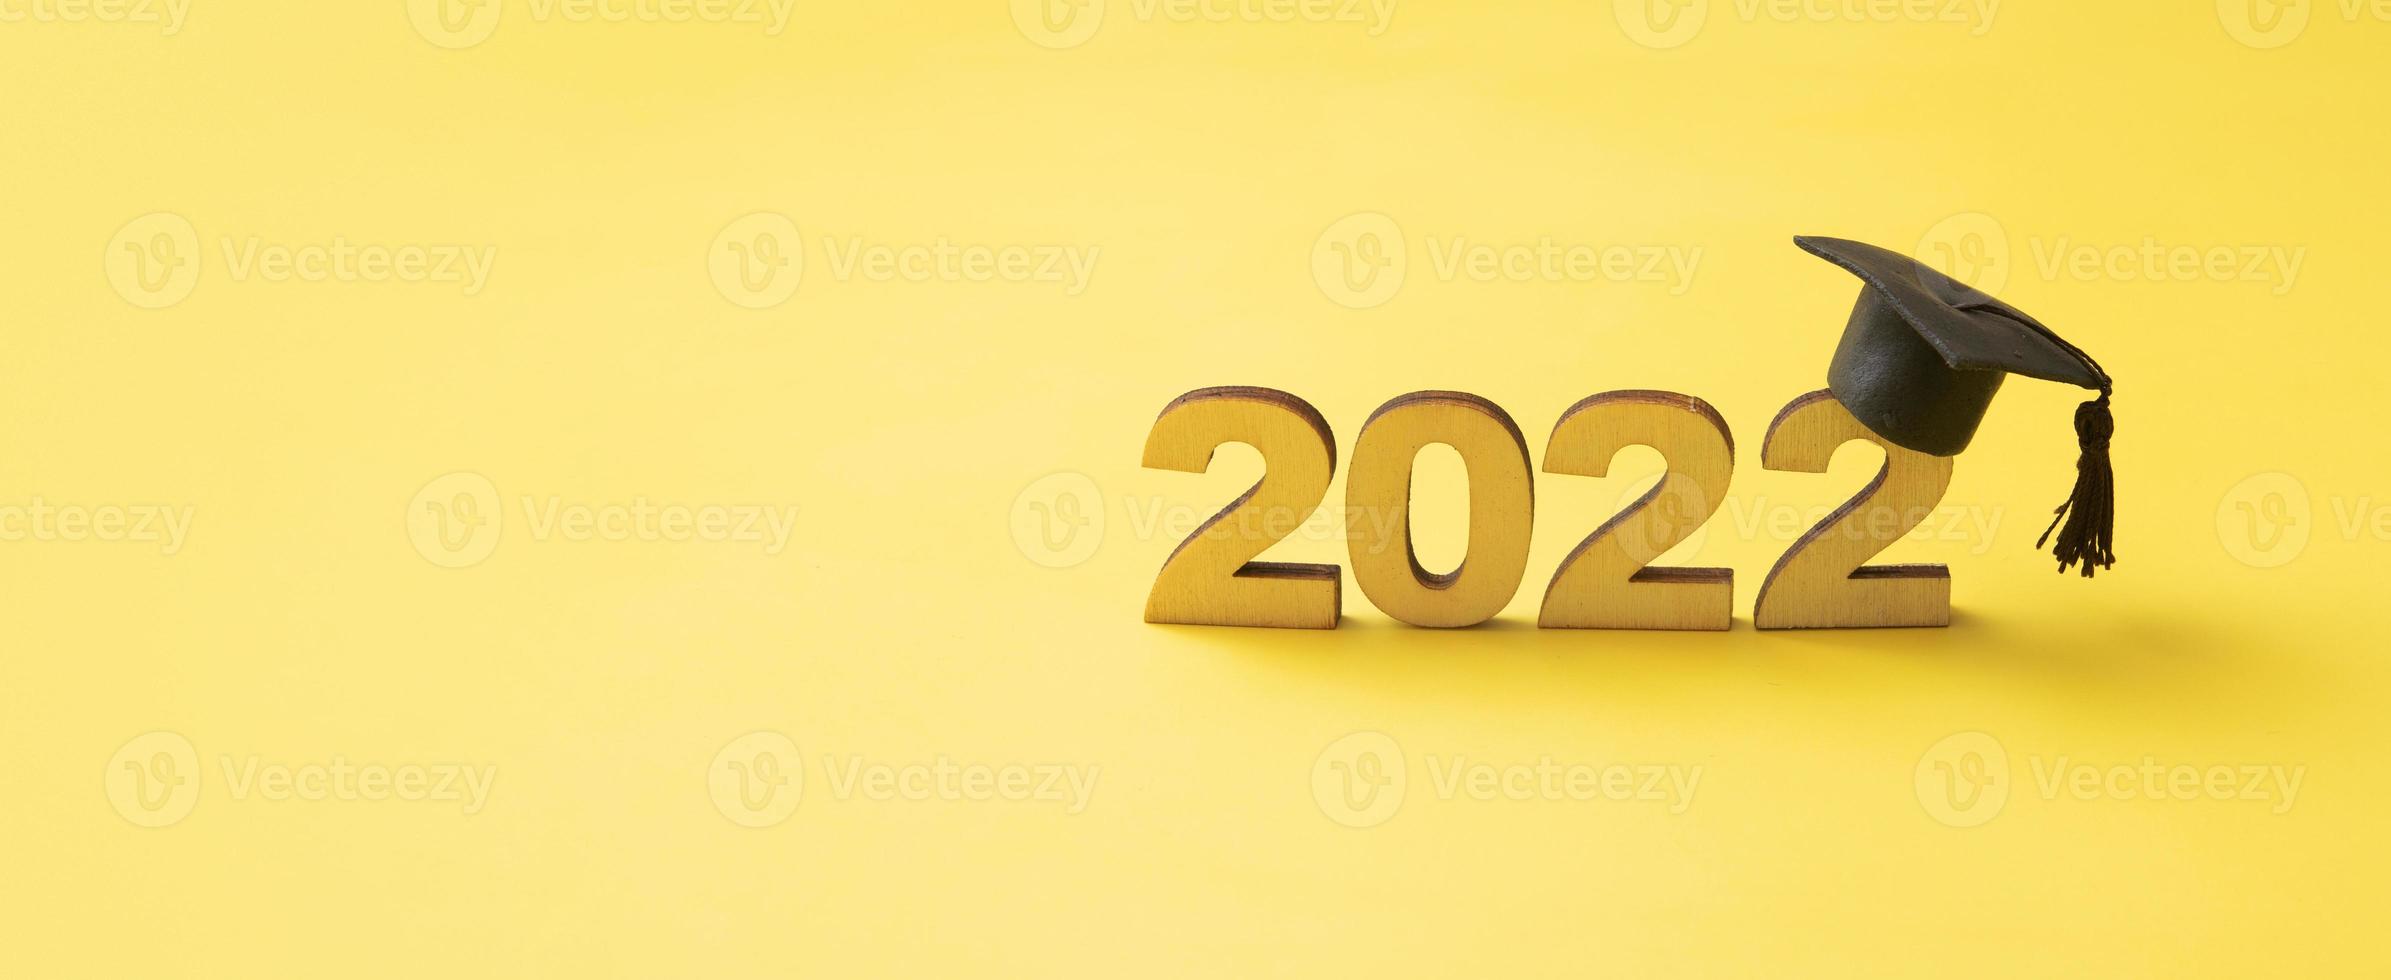 Graduated hat or cap with wooden number 2022 on a yellow glitter background. Class 2022 banner format photo